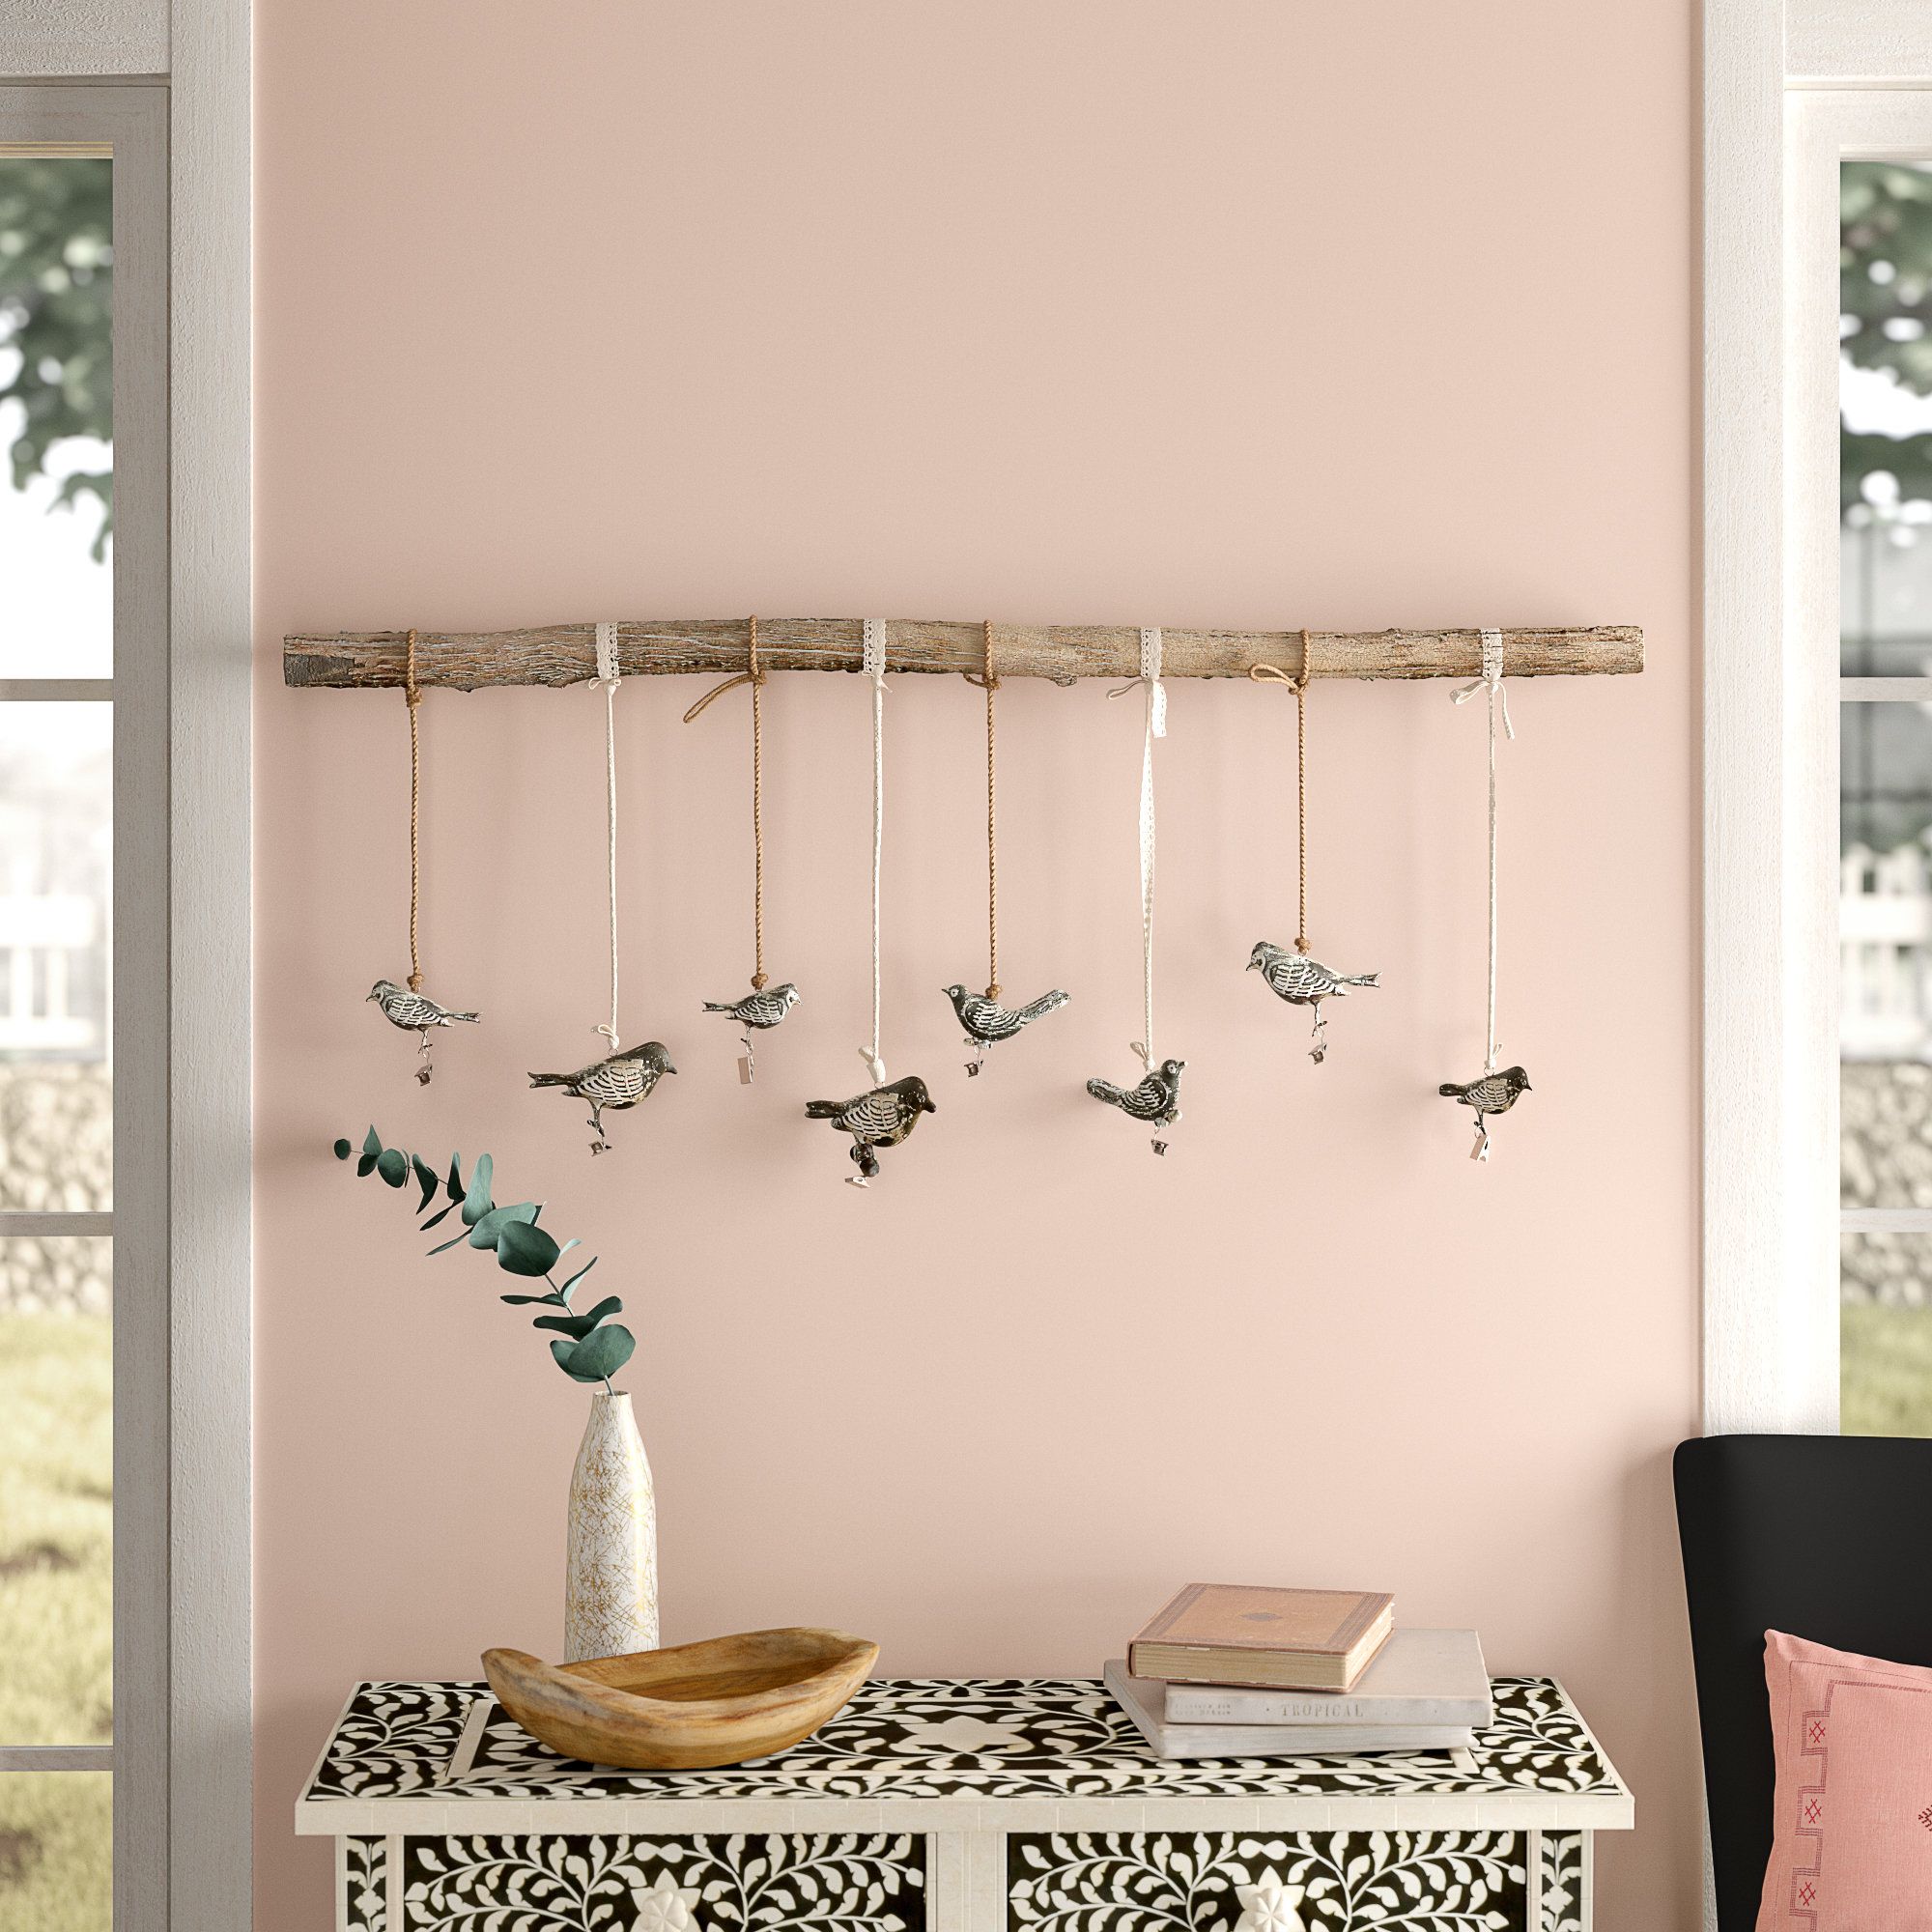 The 30 Best Collection of Birds on a Branch Wall Decor